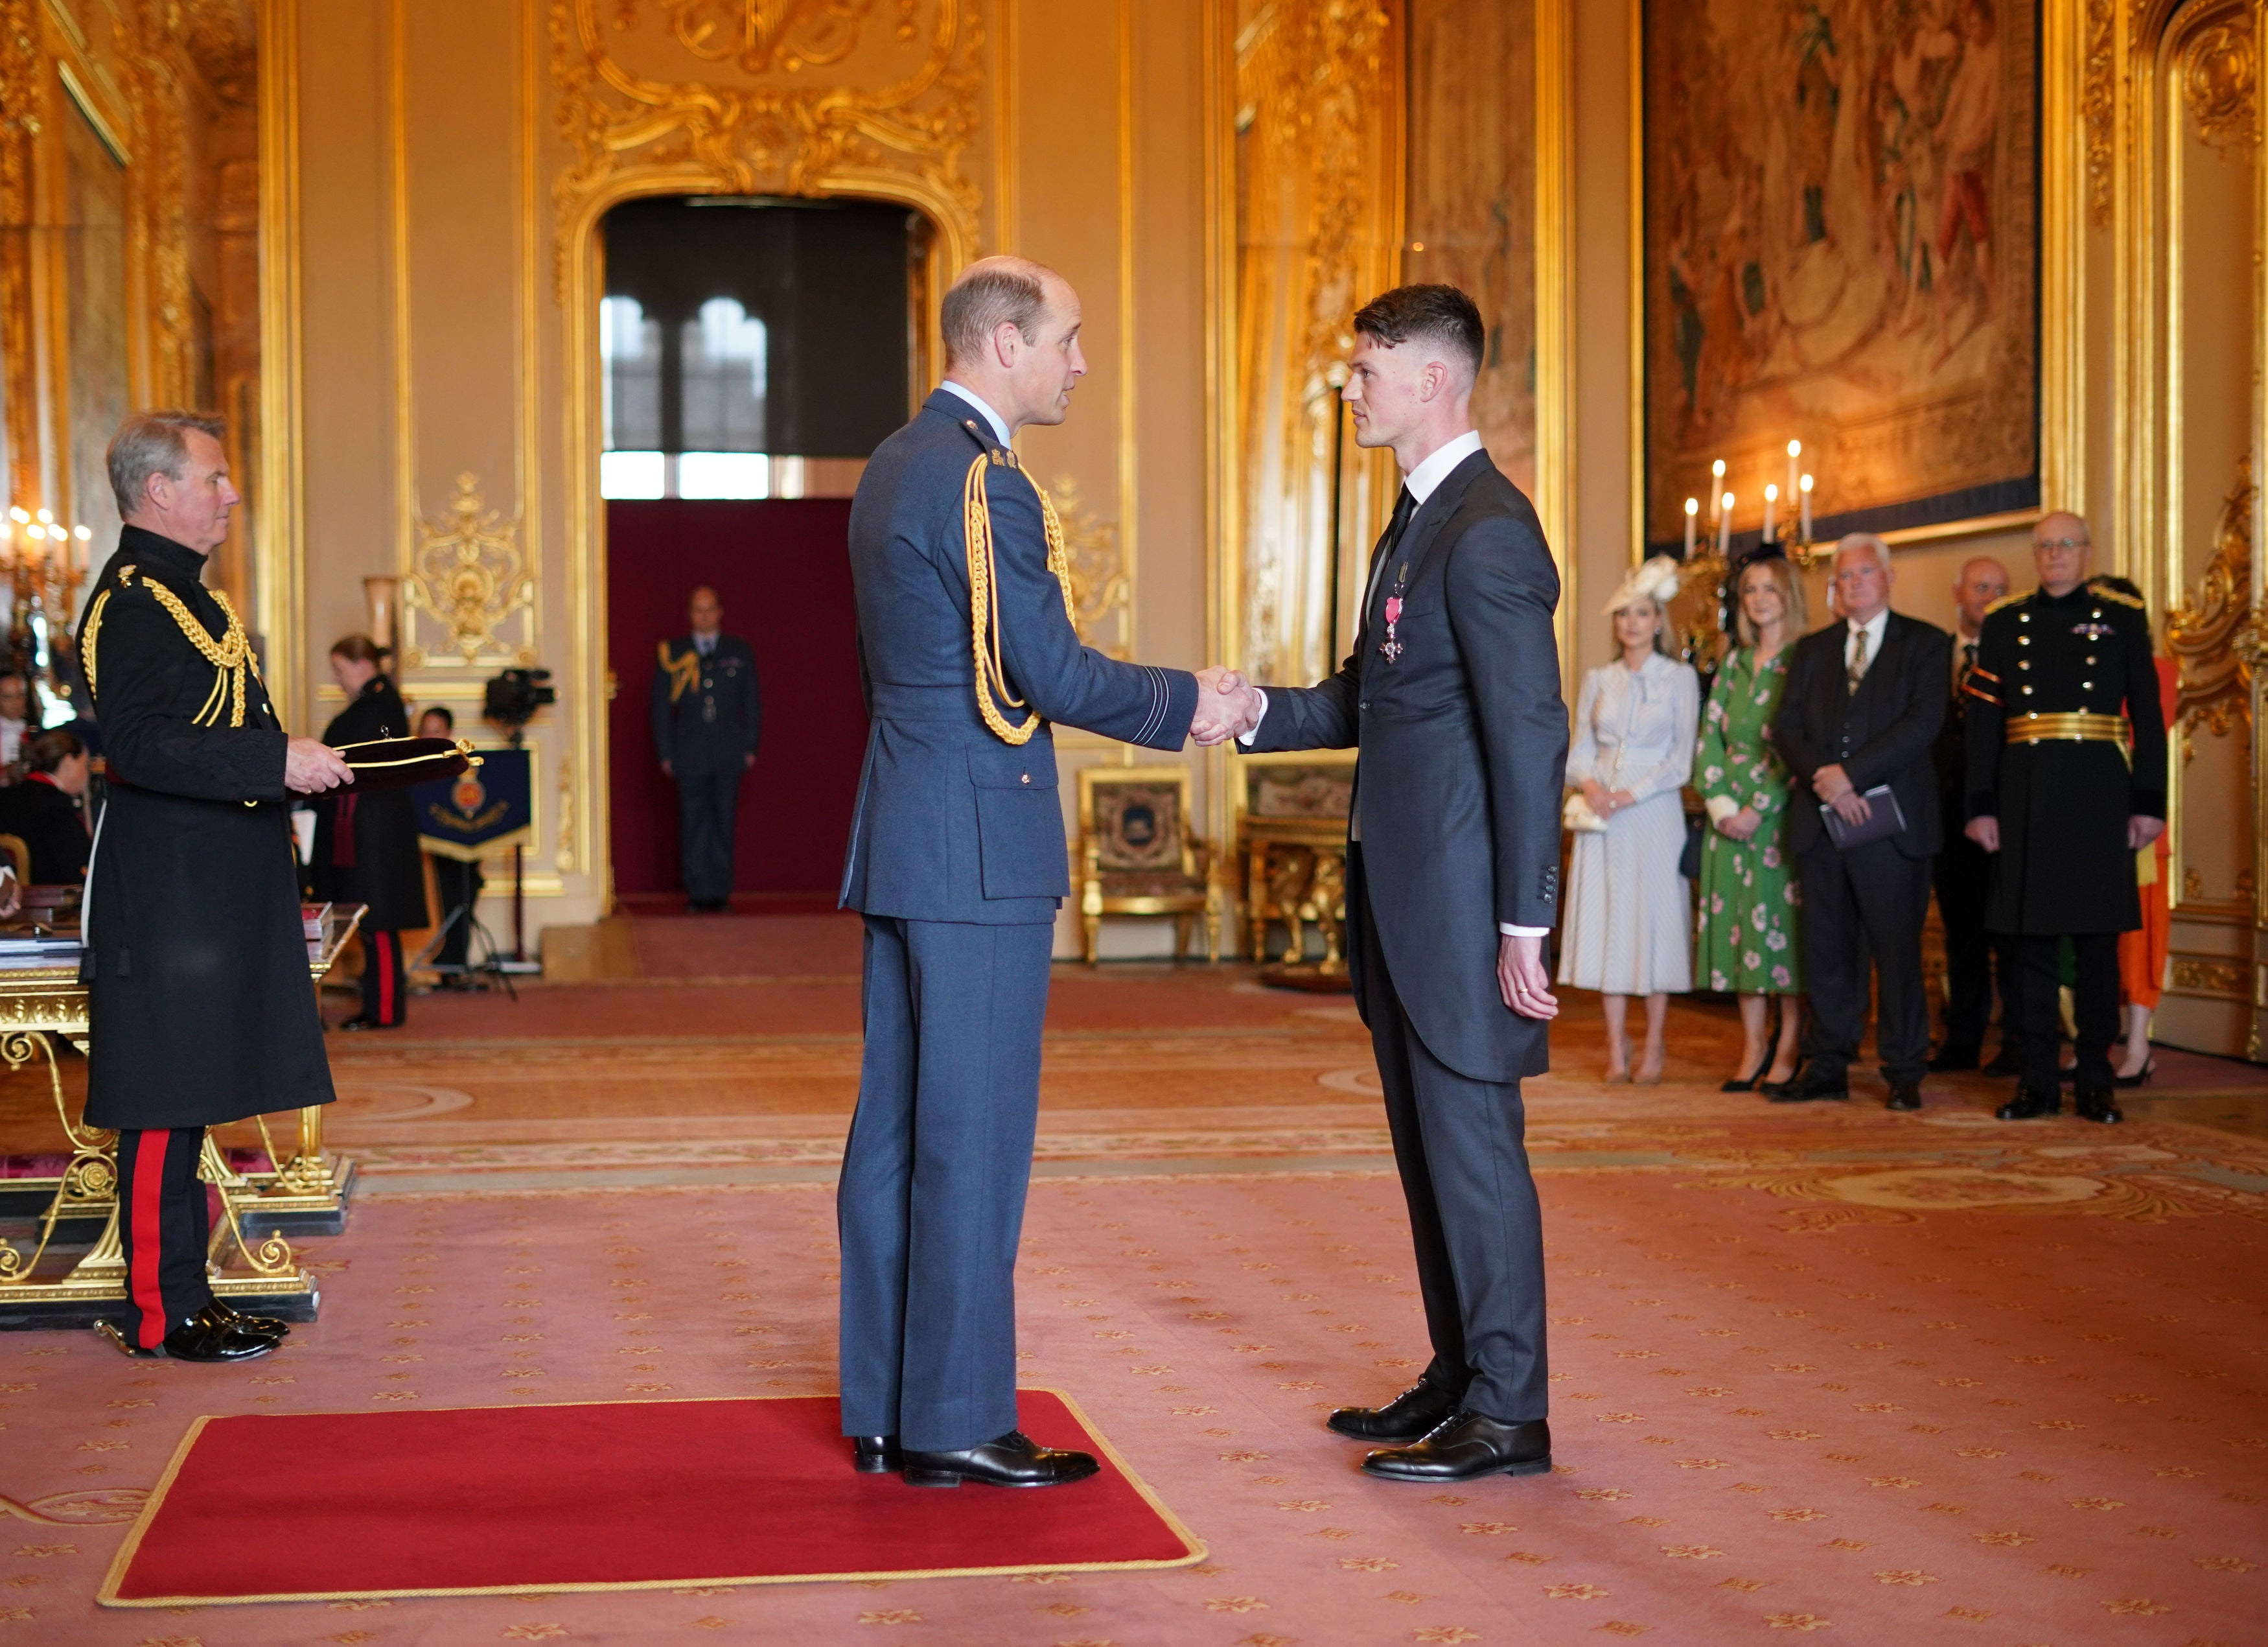 Ben Francis was made a Member of the Order of the British Empire by the Prince of Wales at Windsor Castle